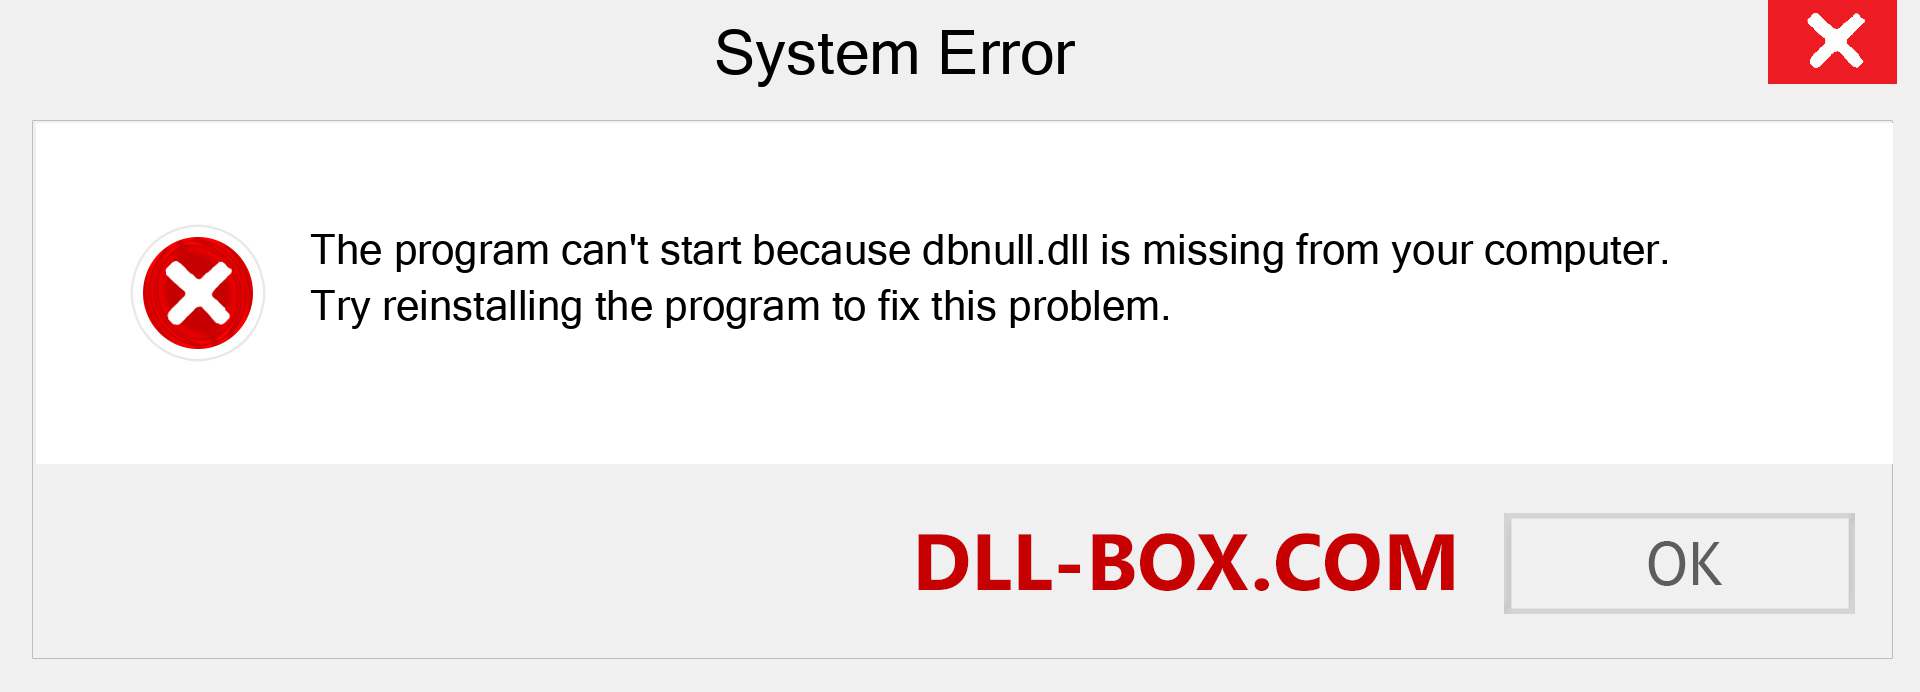  dbnull.dll file is missing?. Download for Windows 7, 8, 10 - Fix  dbnull dll Missing Error on Windows, photos, images